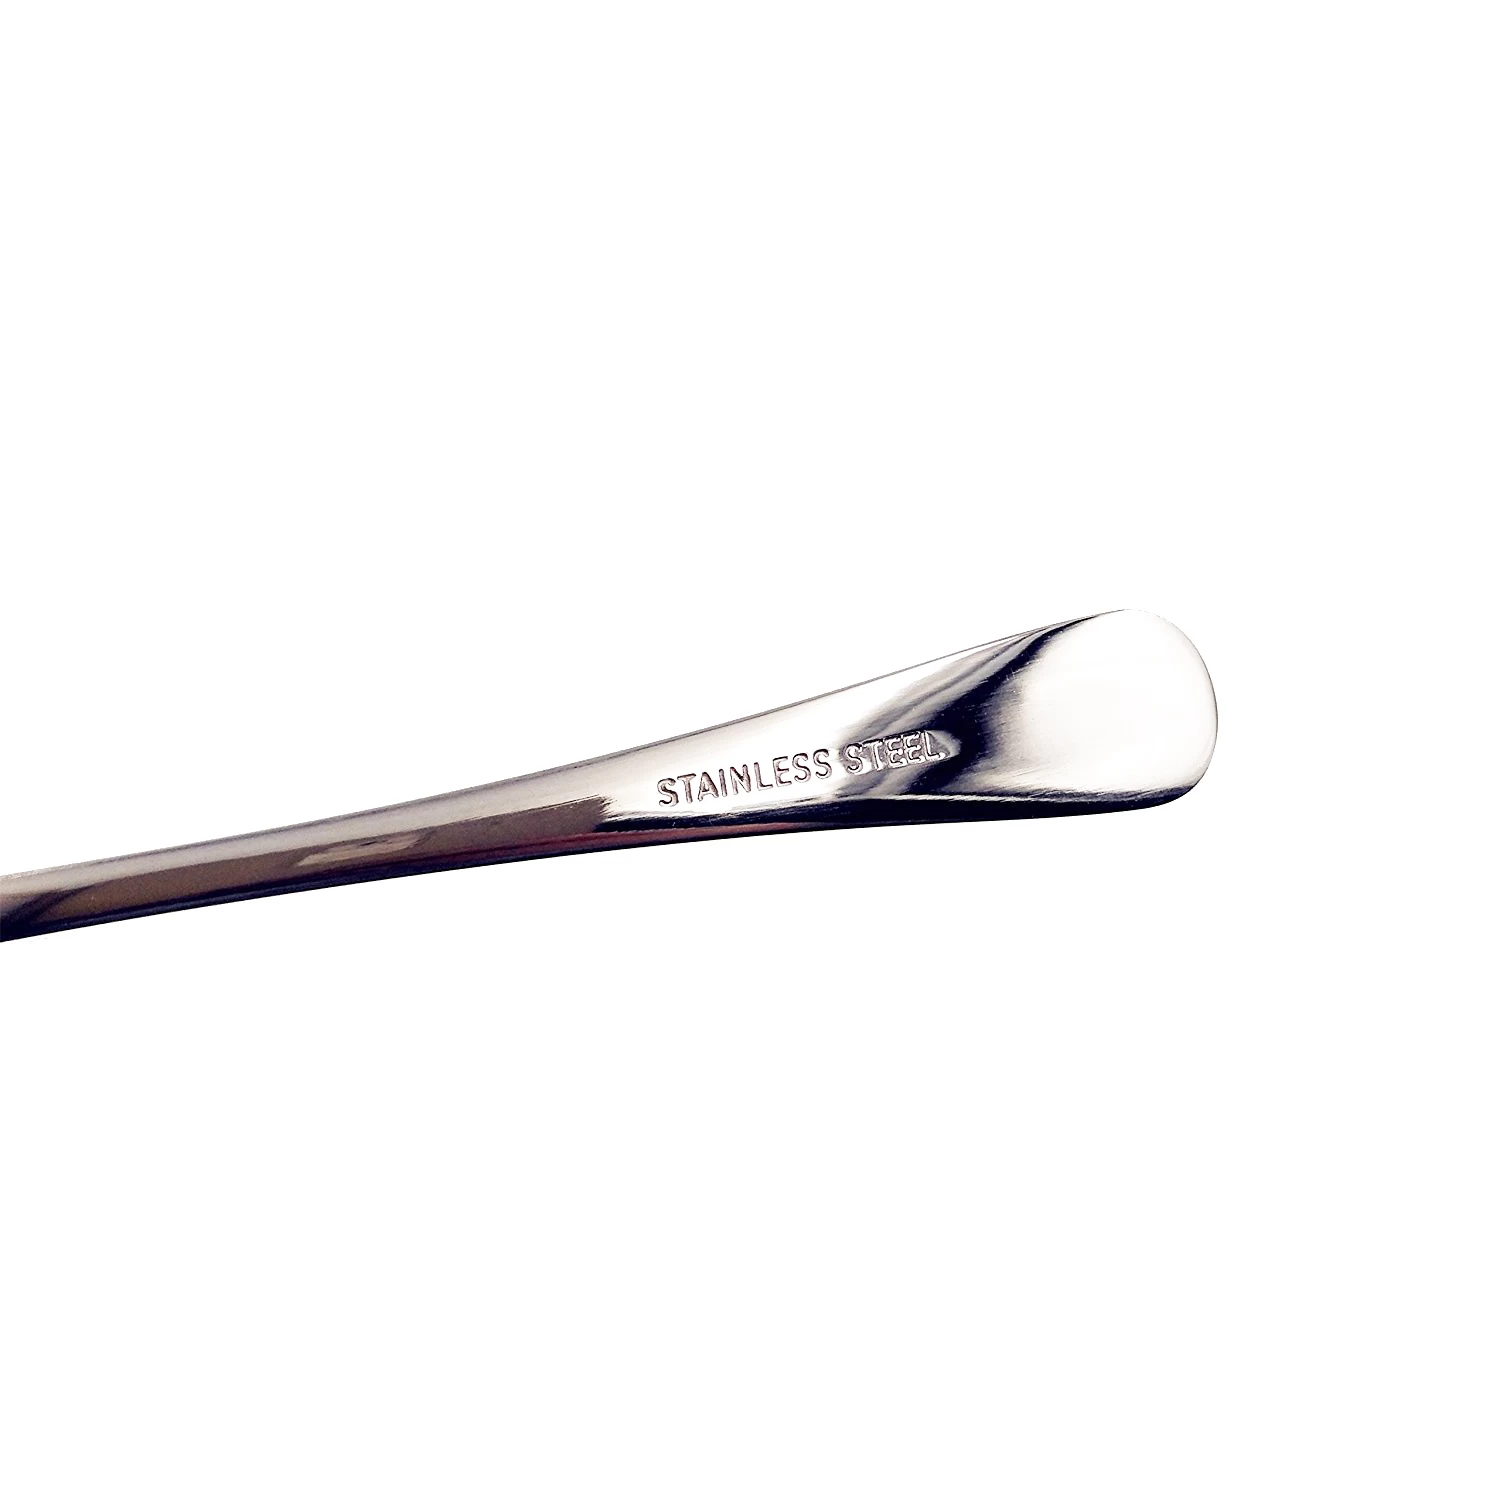 Stainless steel coffee spoon manufacturer china, Stainless steel rainbow spoon china supplier